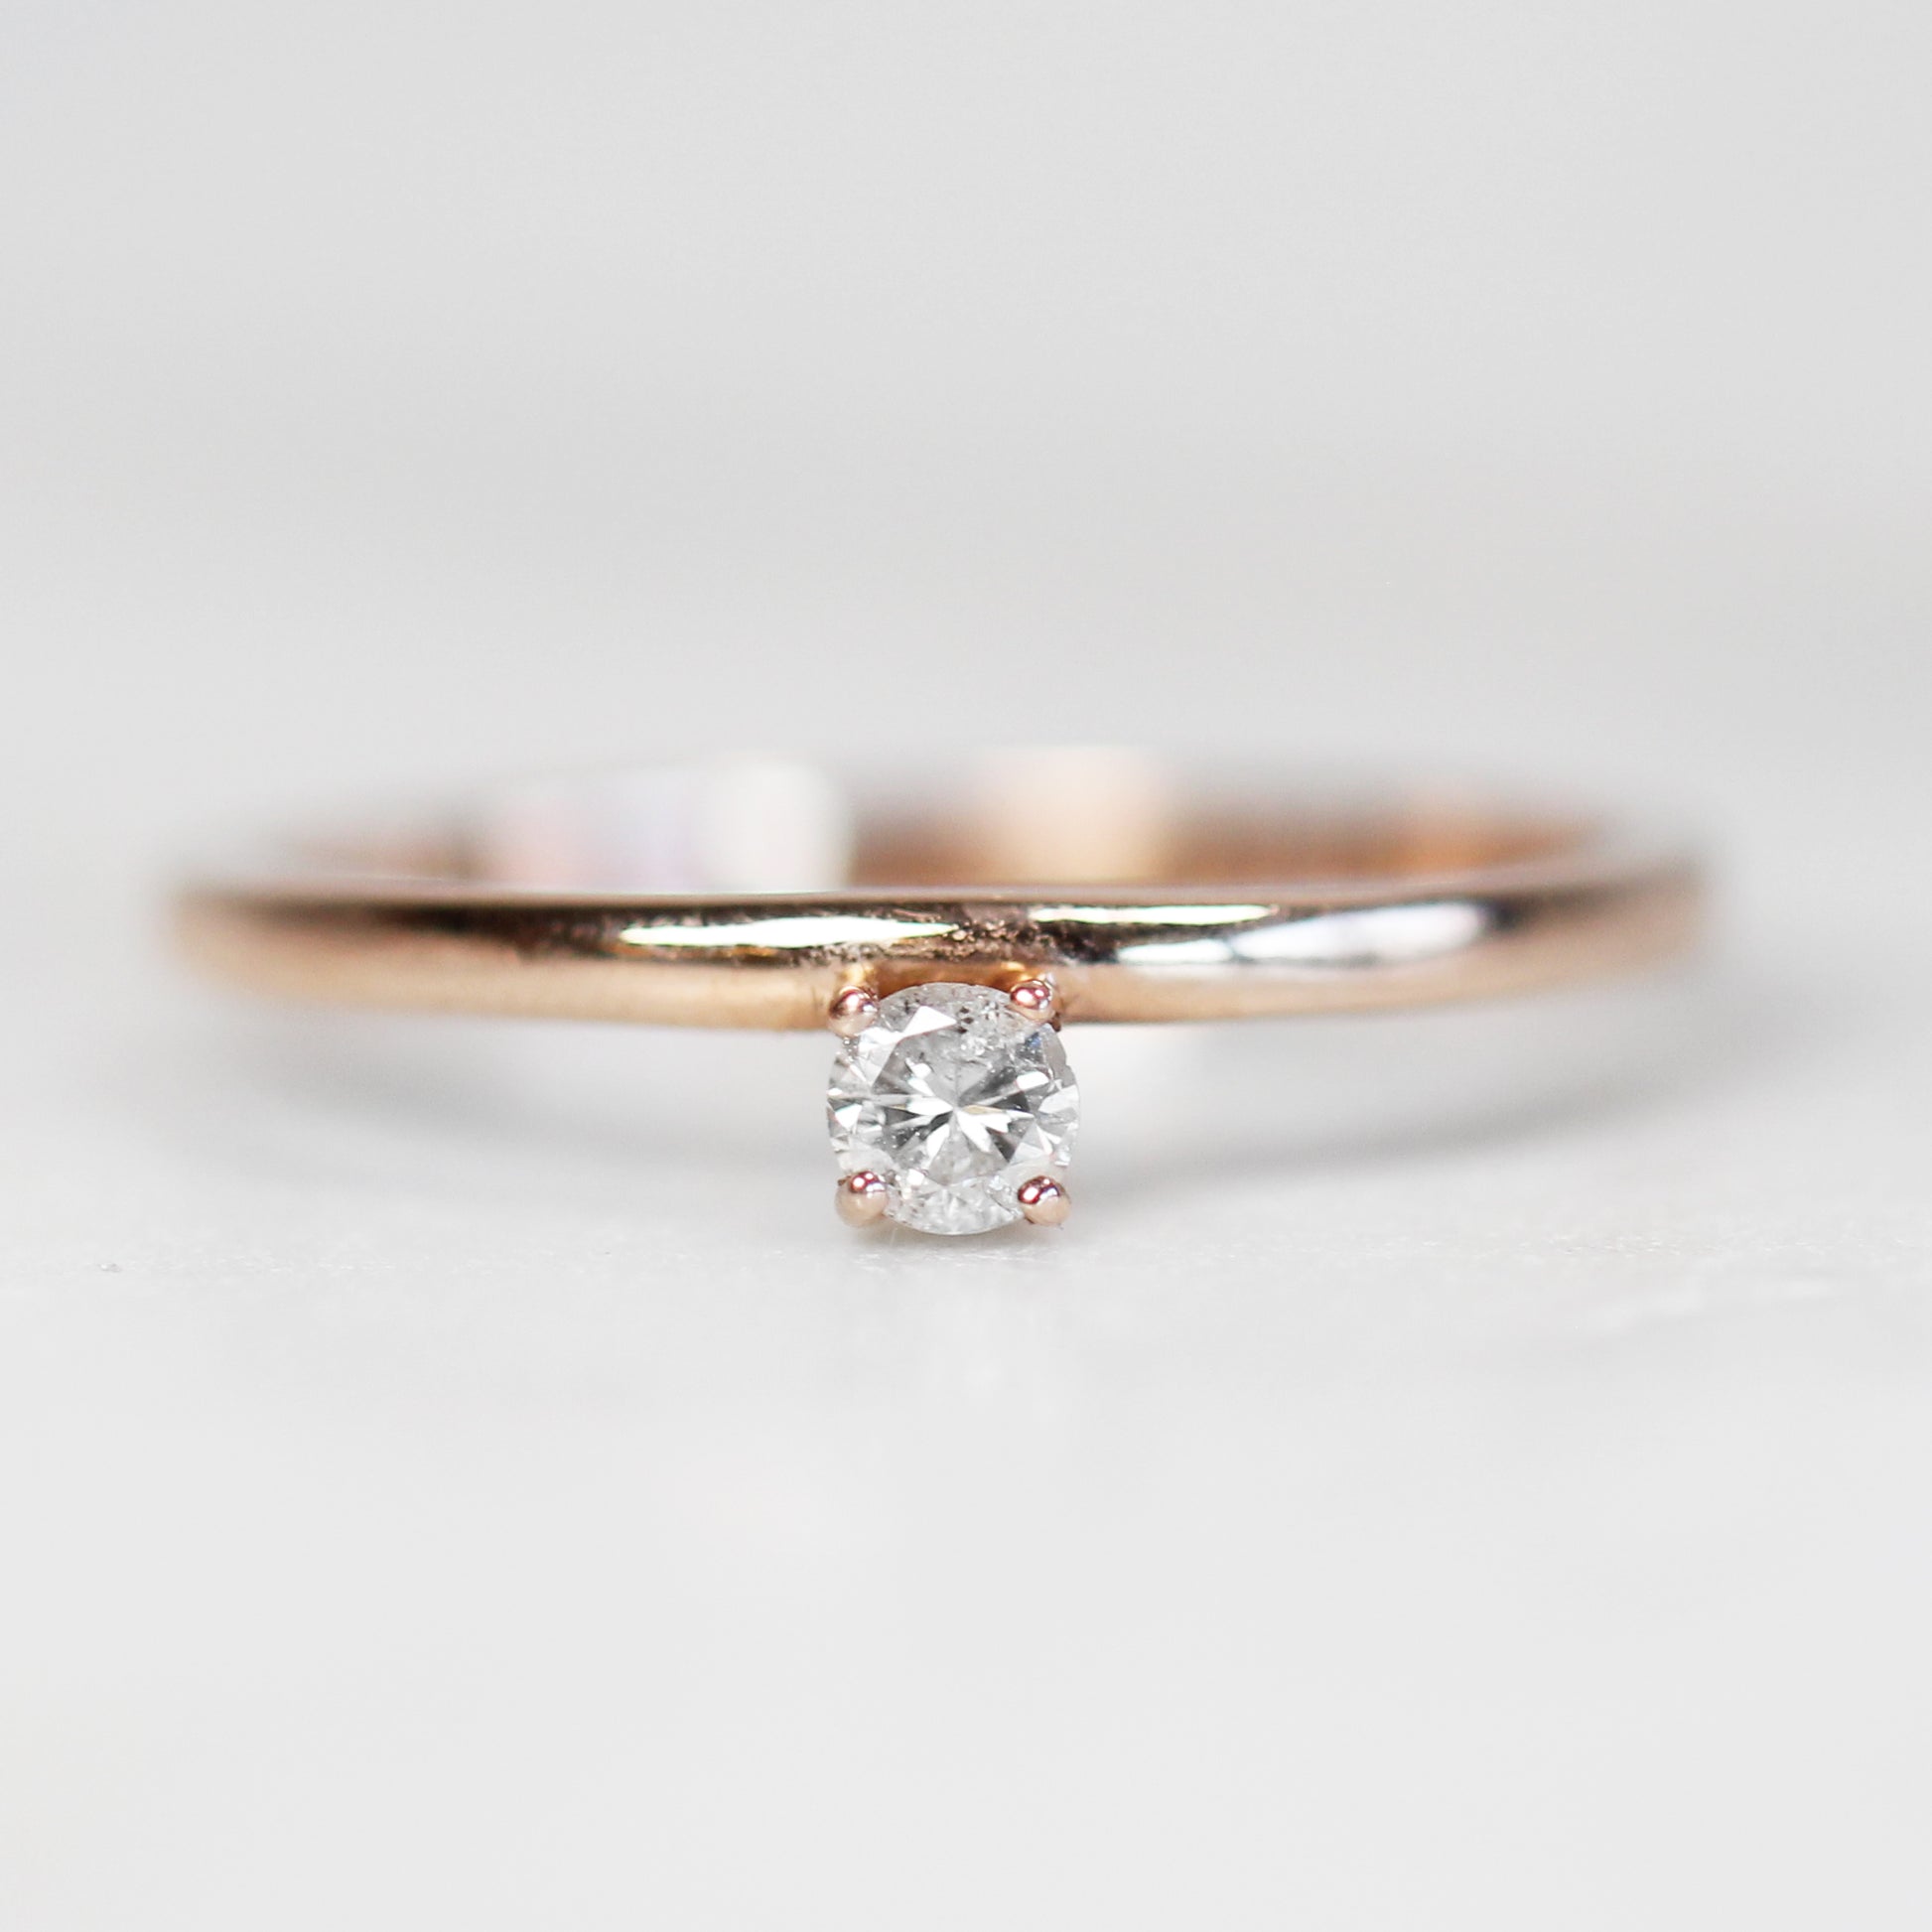 Najeal Ring - Asymmetrical Solitaire Diamond Ring in 14k Rose Gold - Midwinter Co. Alternative Bridal Rings and Modern Fine Jewelry